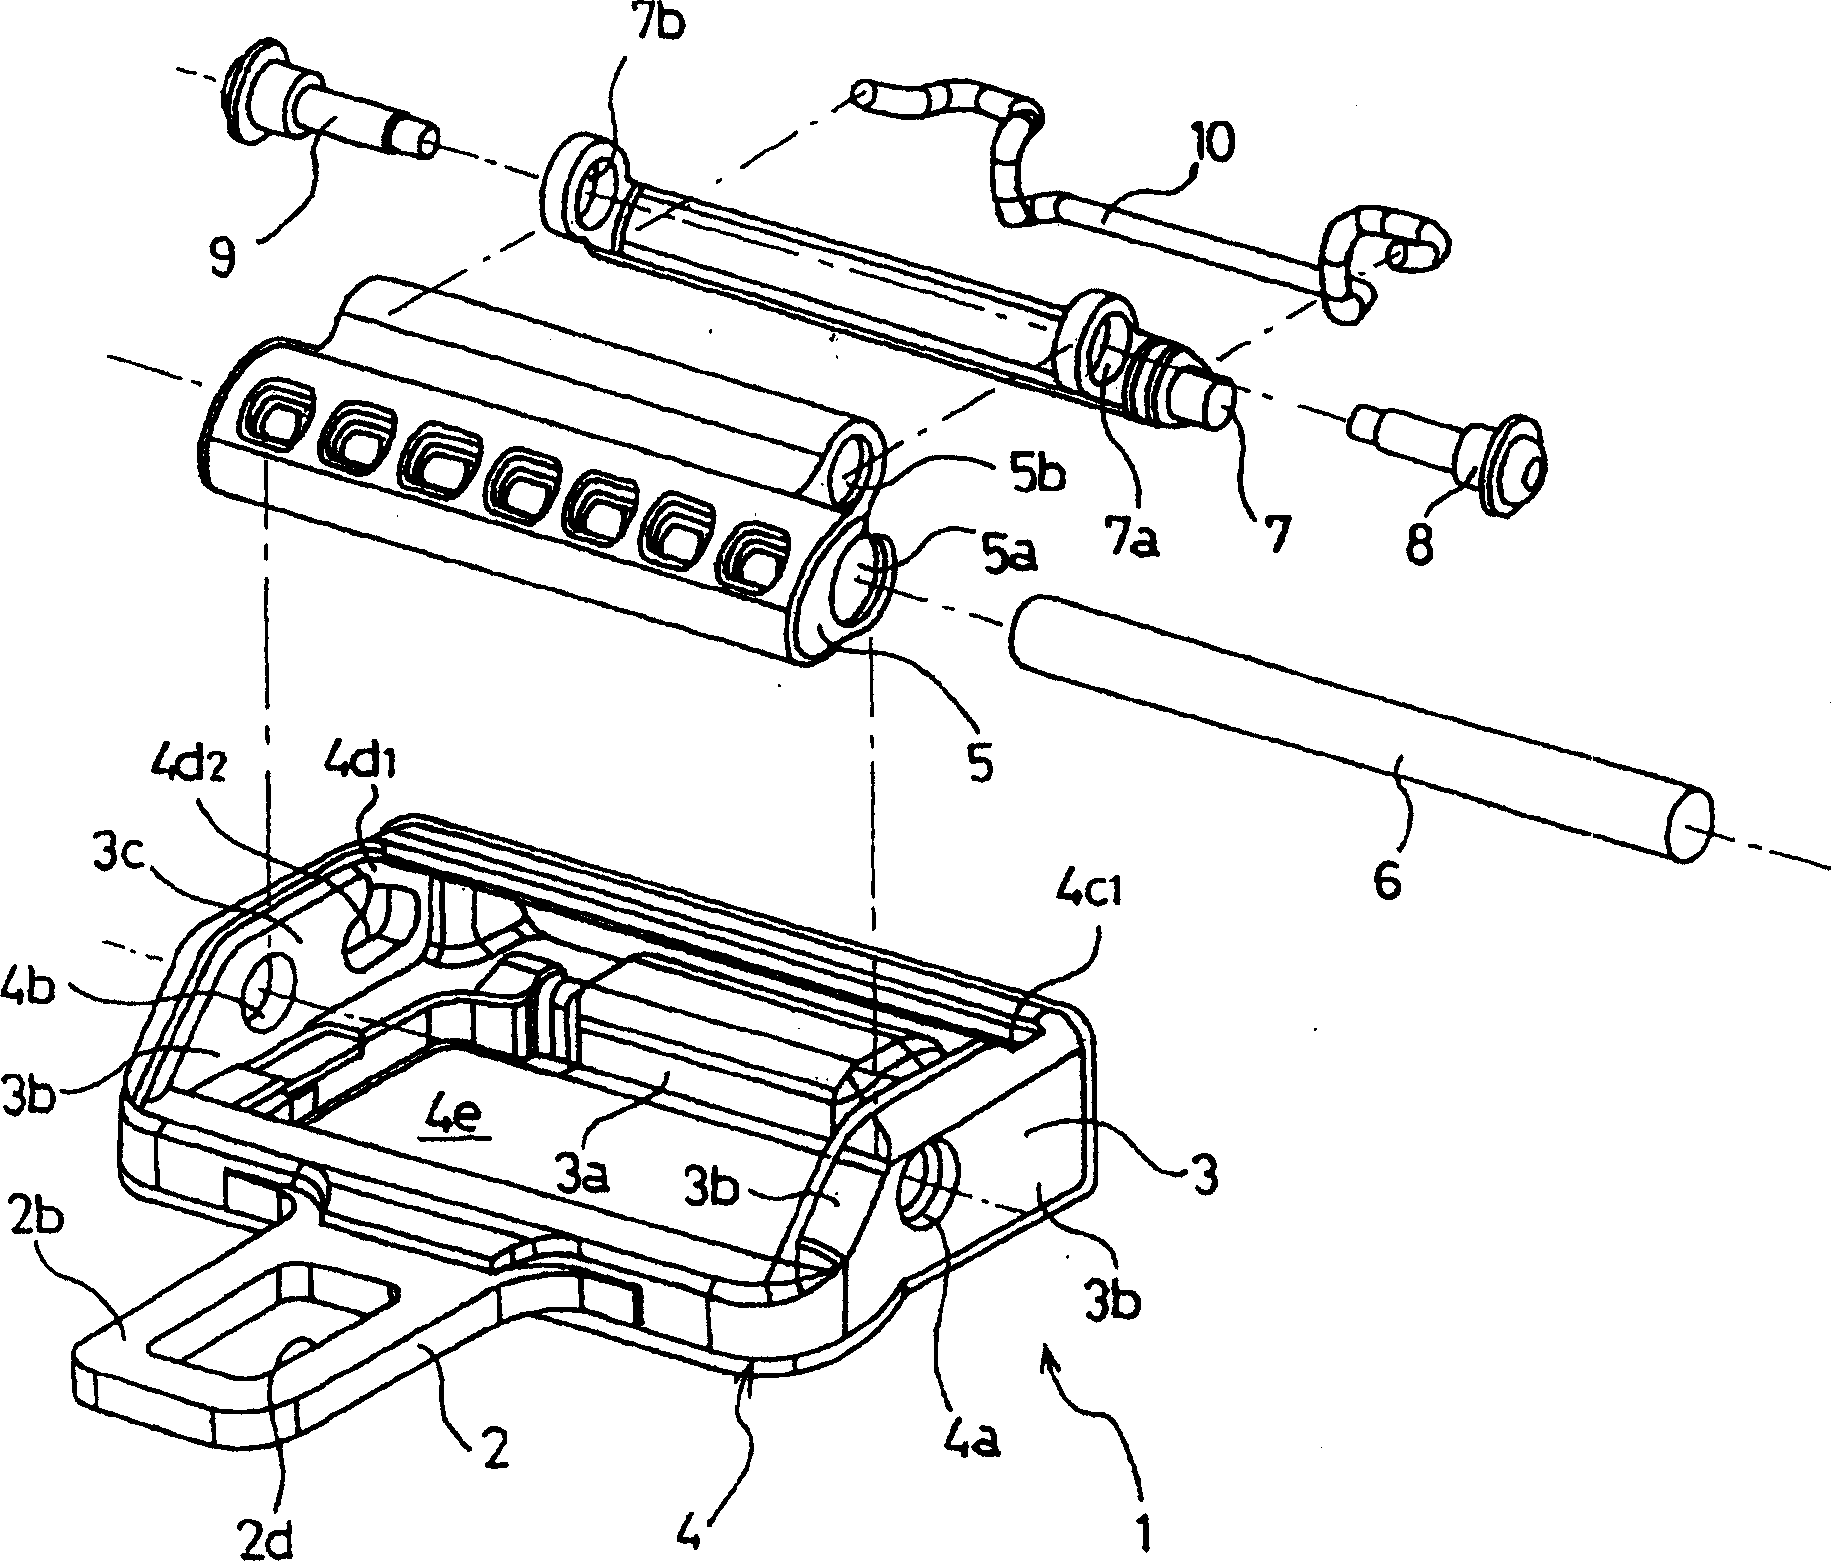 Tongue and seat belt apparatus employing the same